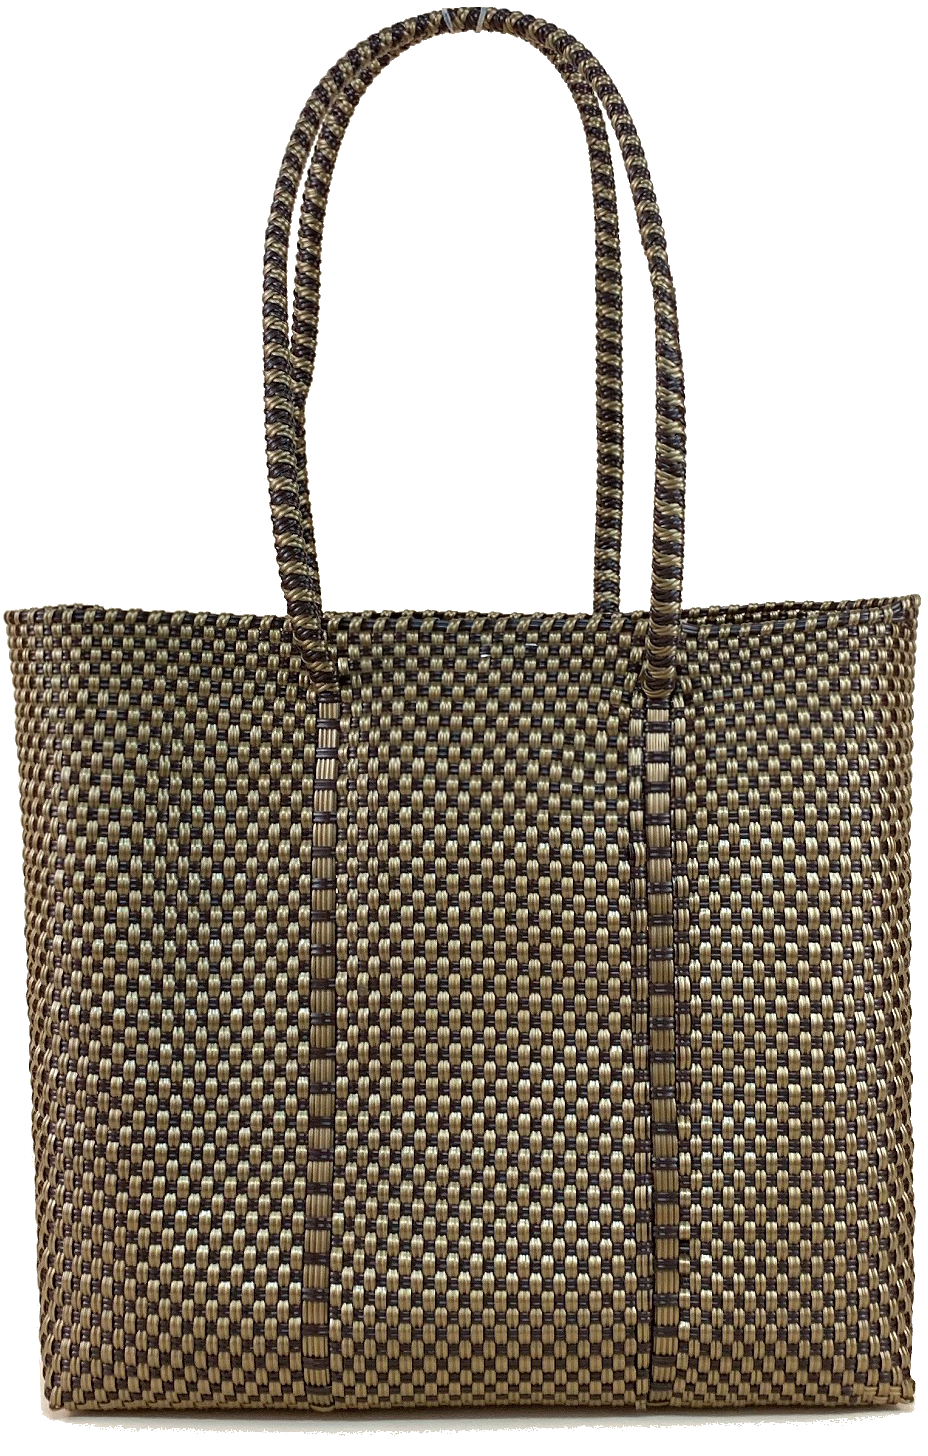 Small Tote -  Brown and Gold